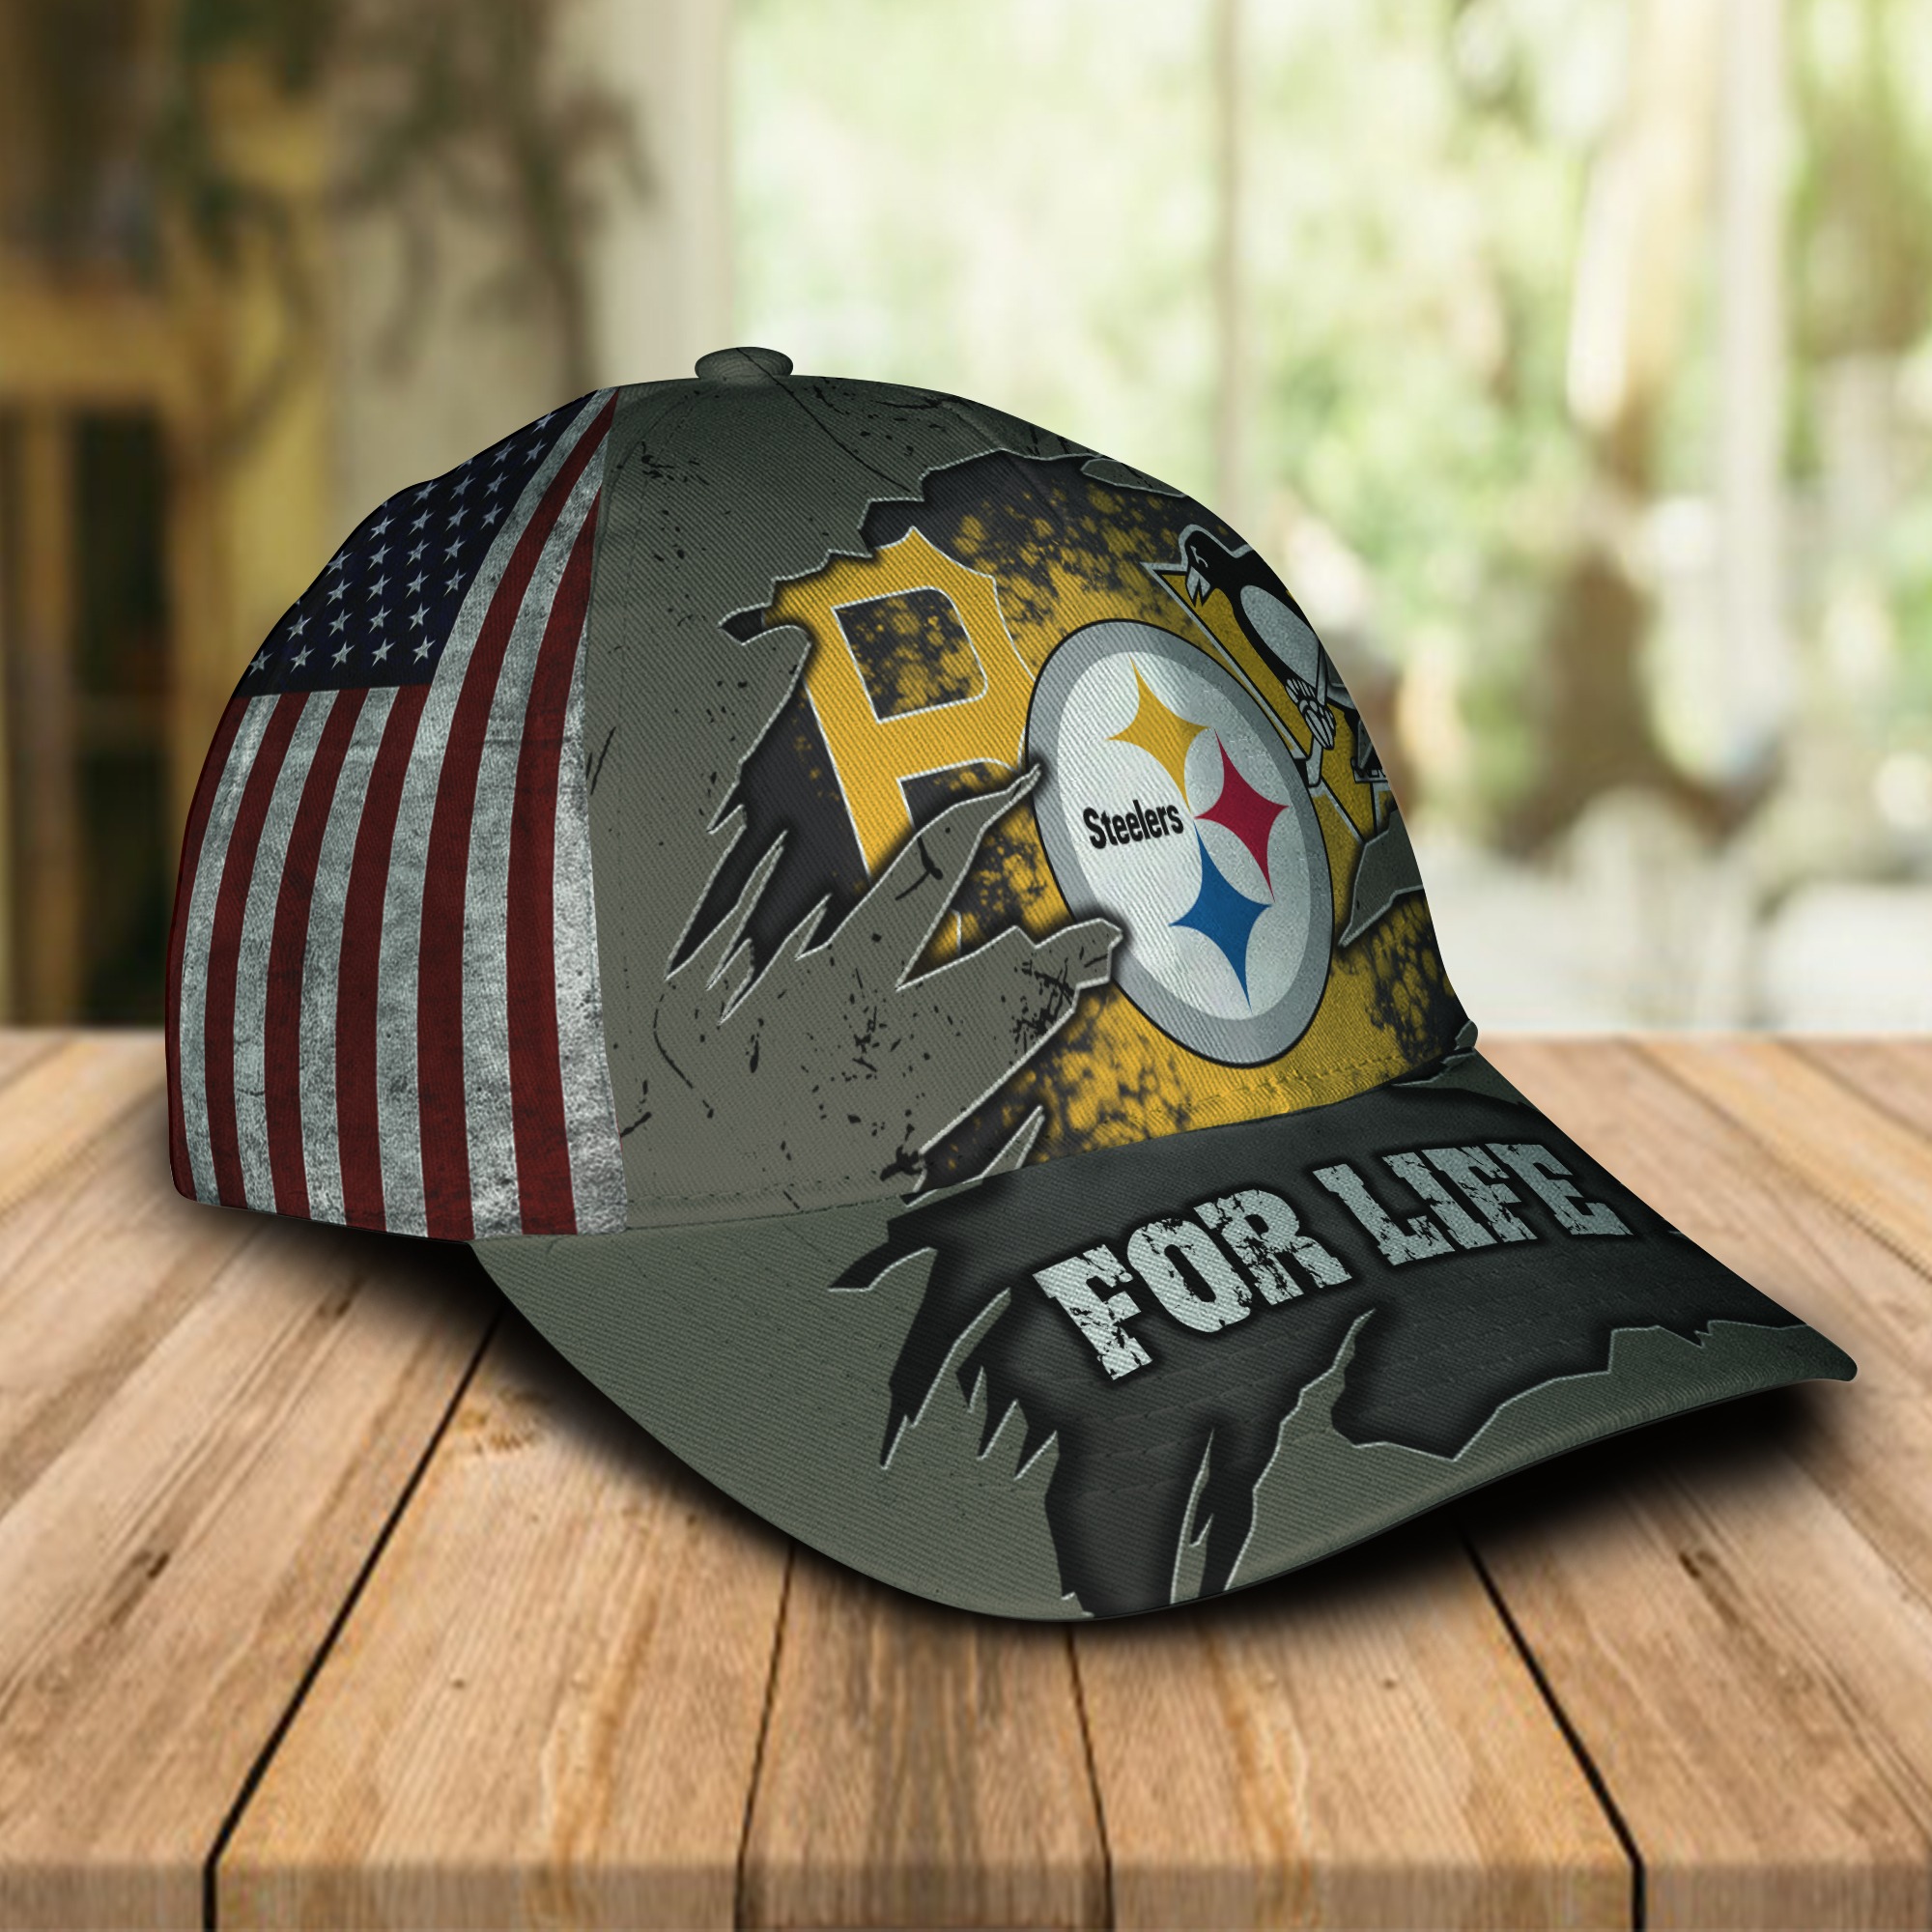 Pittsburgh sports team pirates steelers penguins for life cap 1